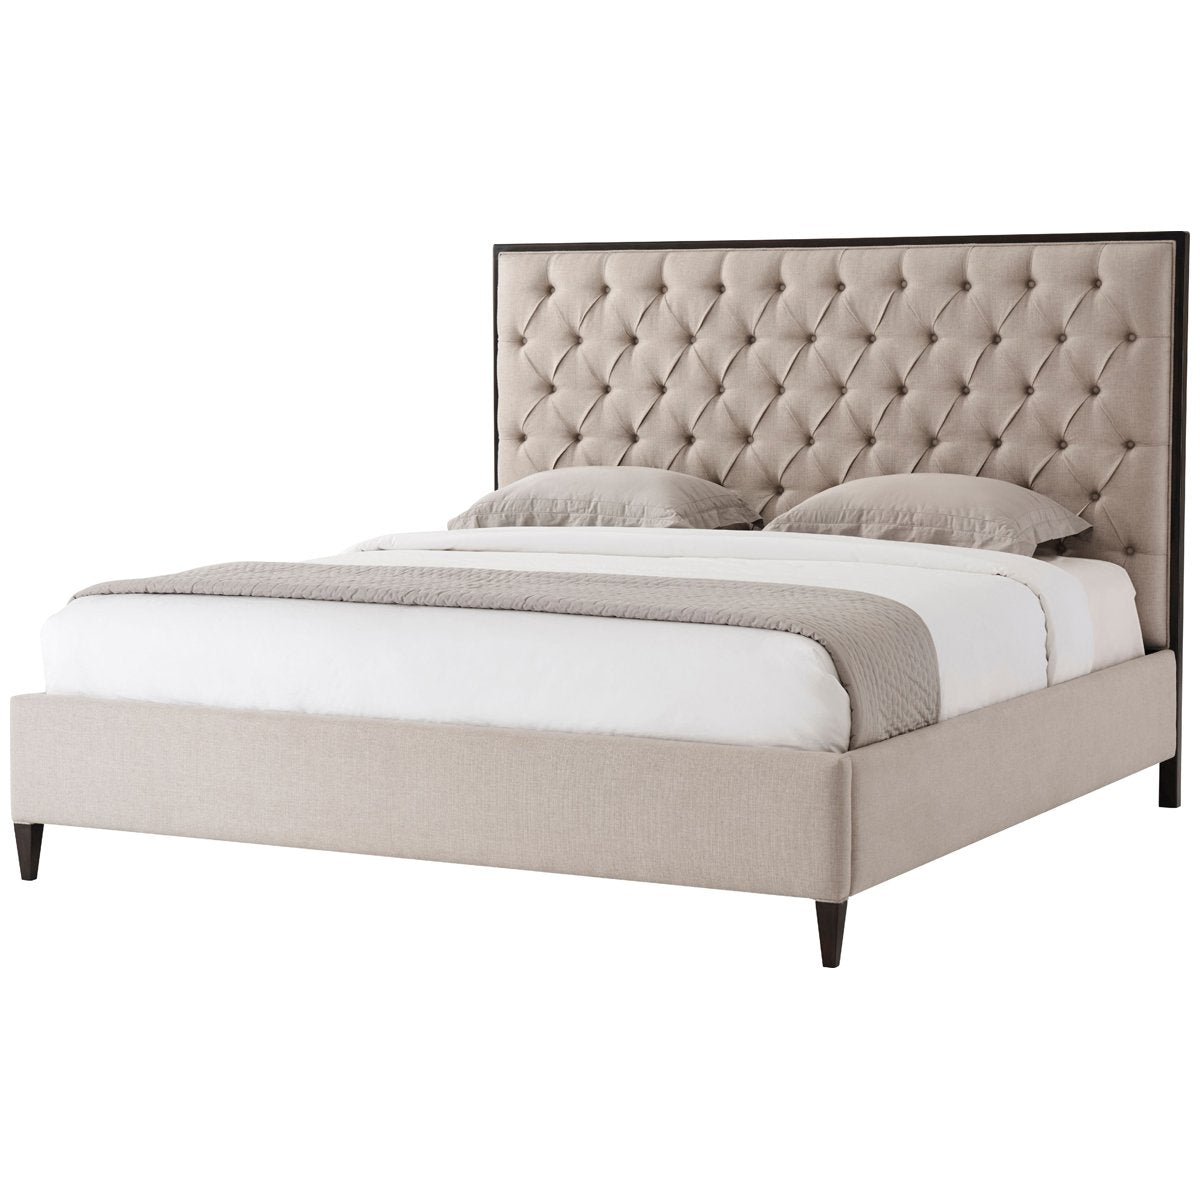 Theodore Alexander Talbot Upholstered US King Bed